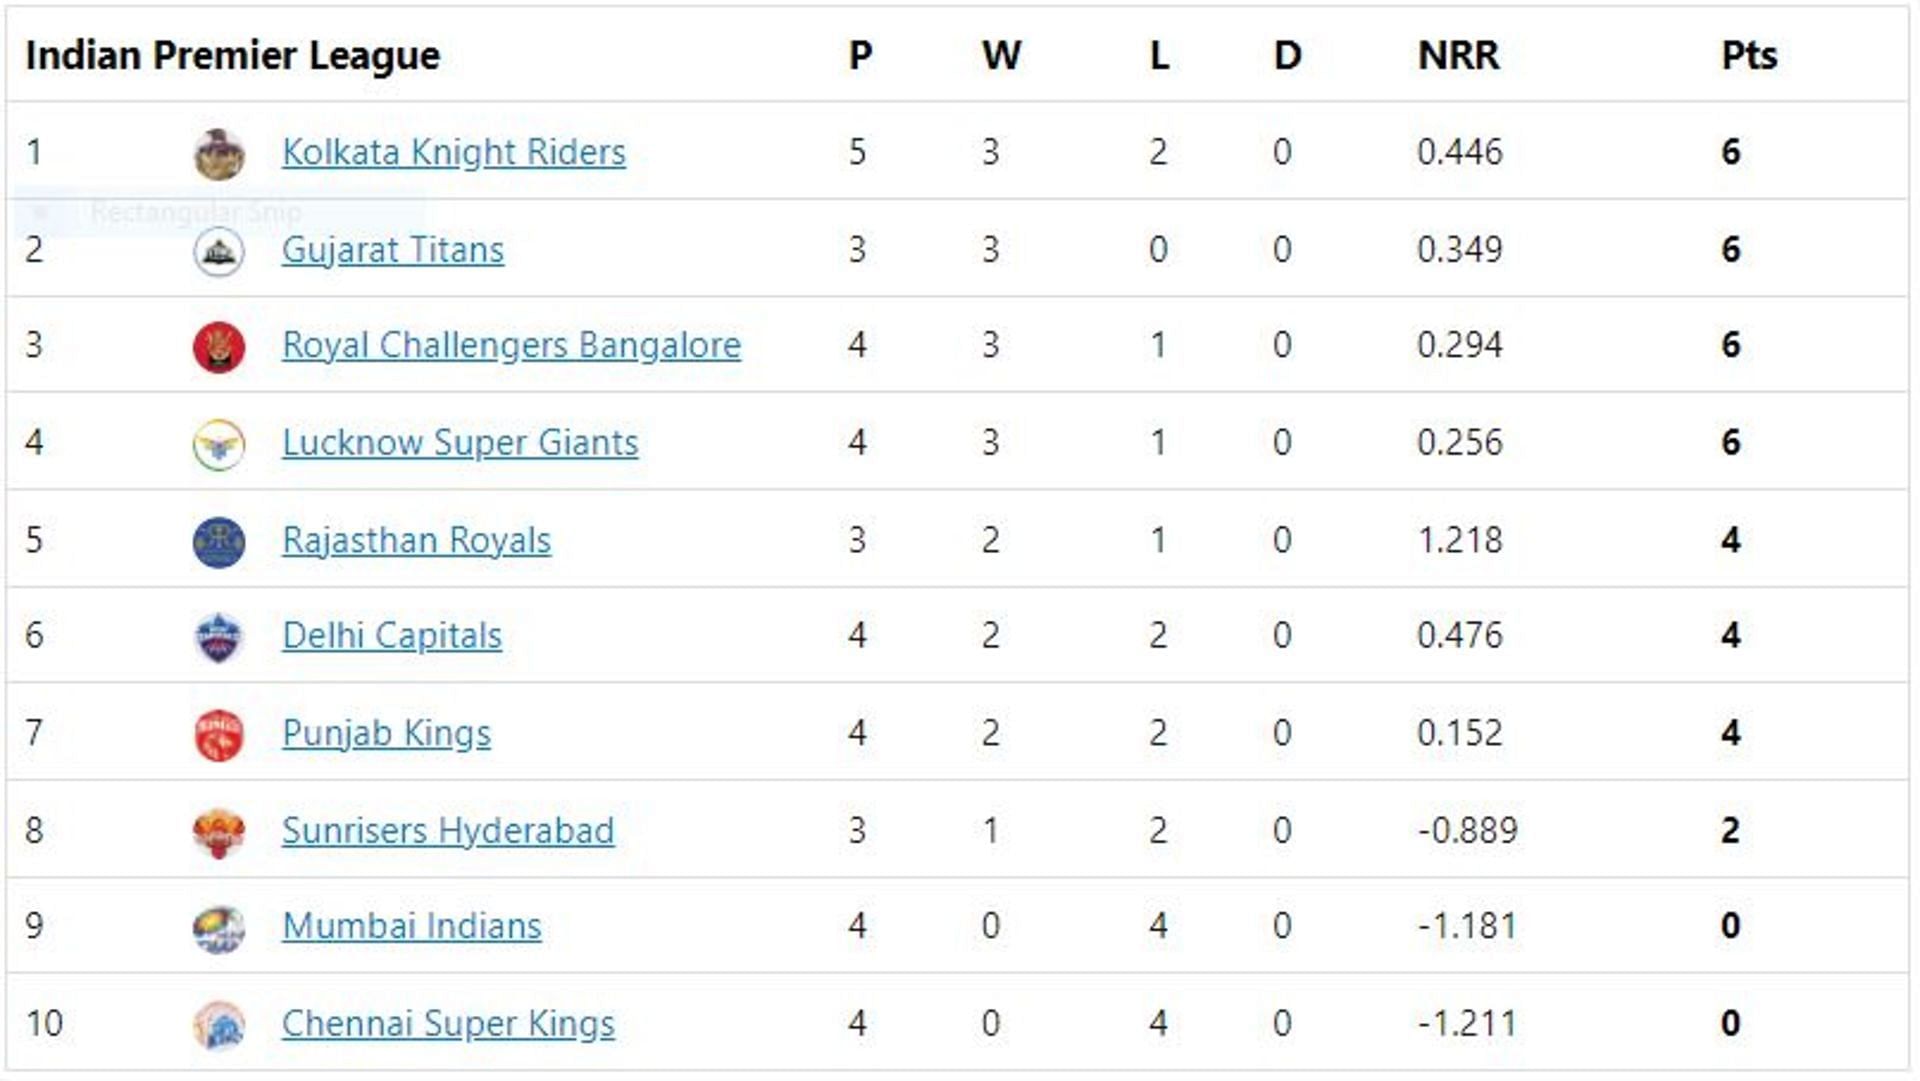 KKR remain at the top of the table for now despite the loss